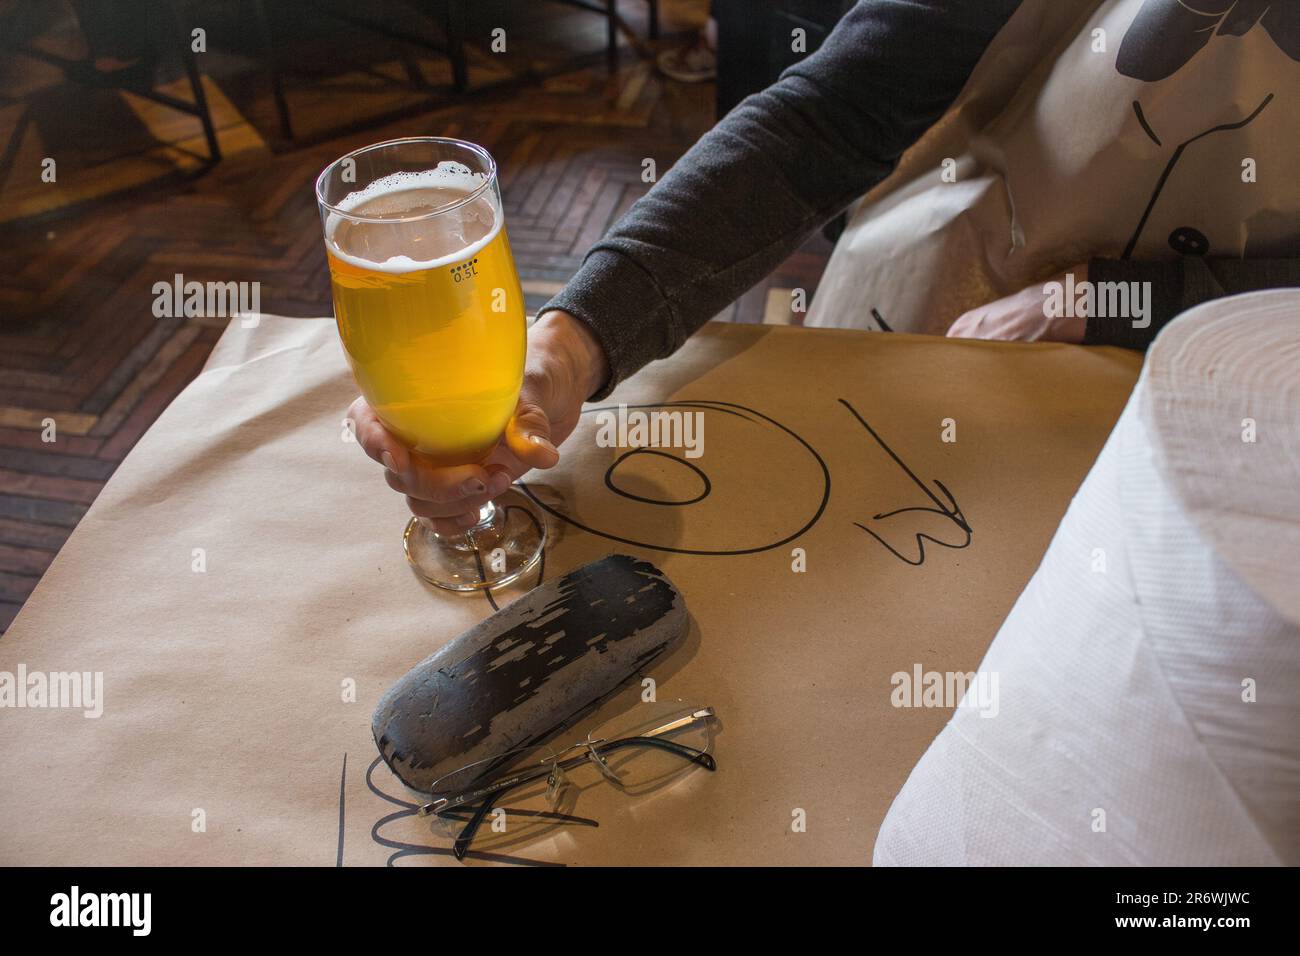 Hand holding glass of beer in restaurant. Beer and eyeglasses on the table. After work drinks. Man in pub with beer. Alcohol drinks. Cheers concept. Stock Photo